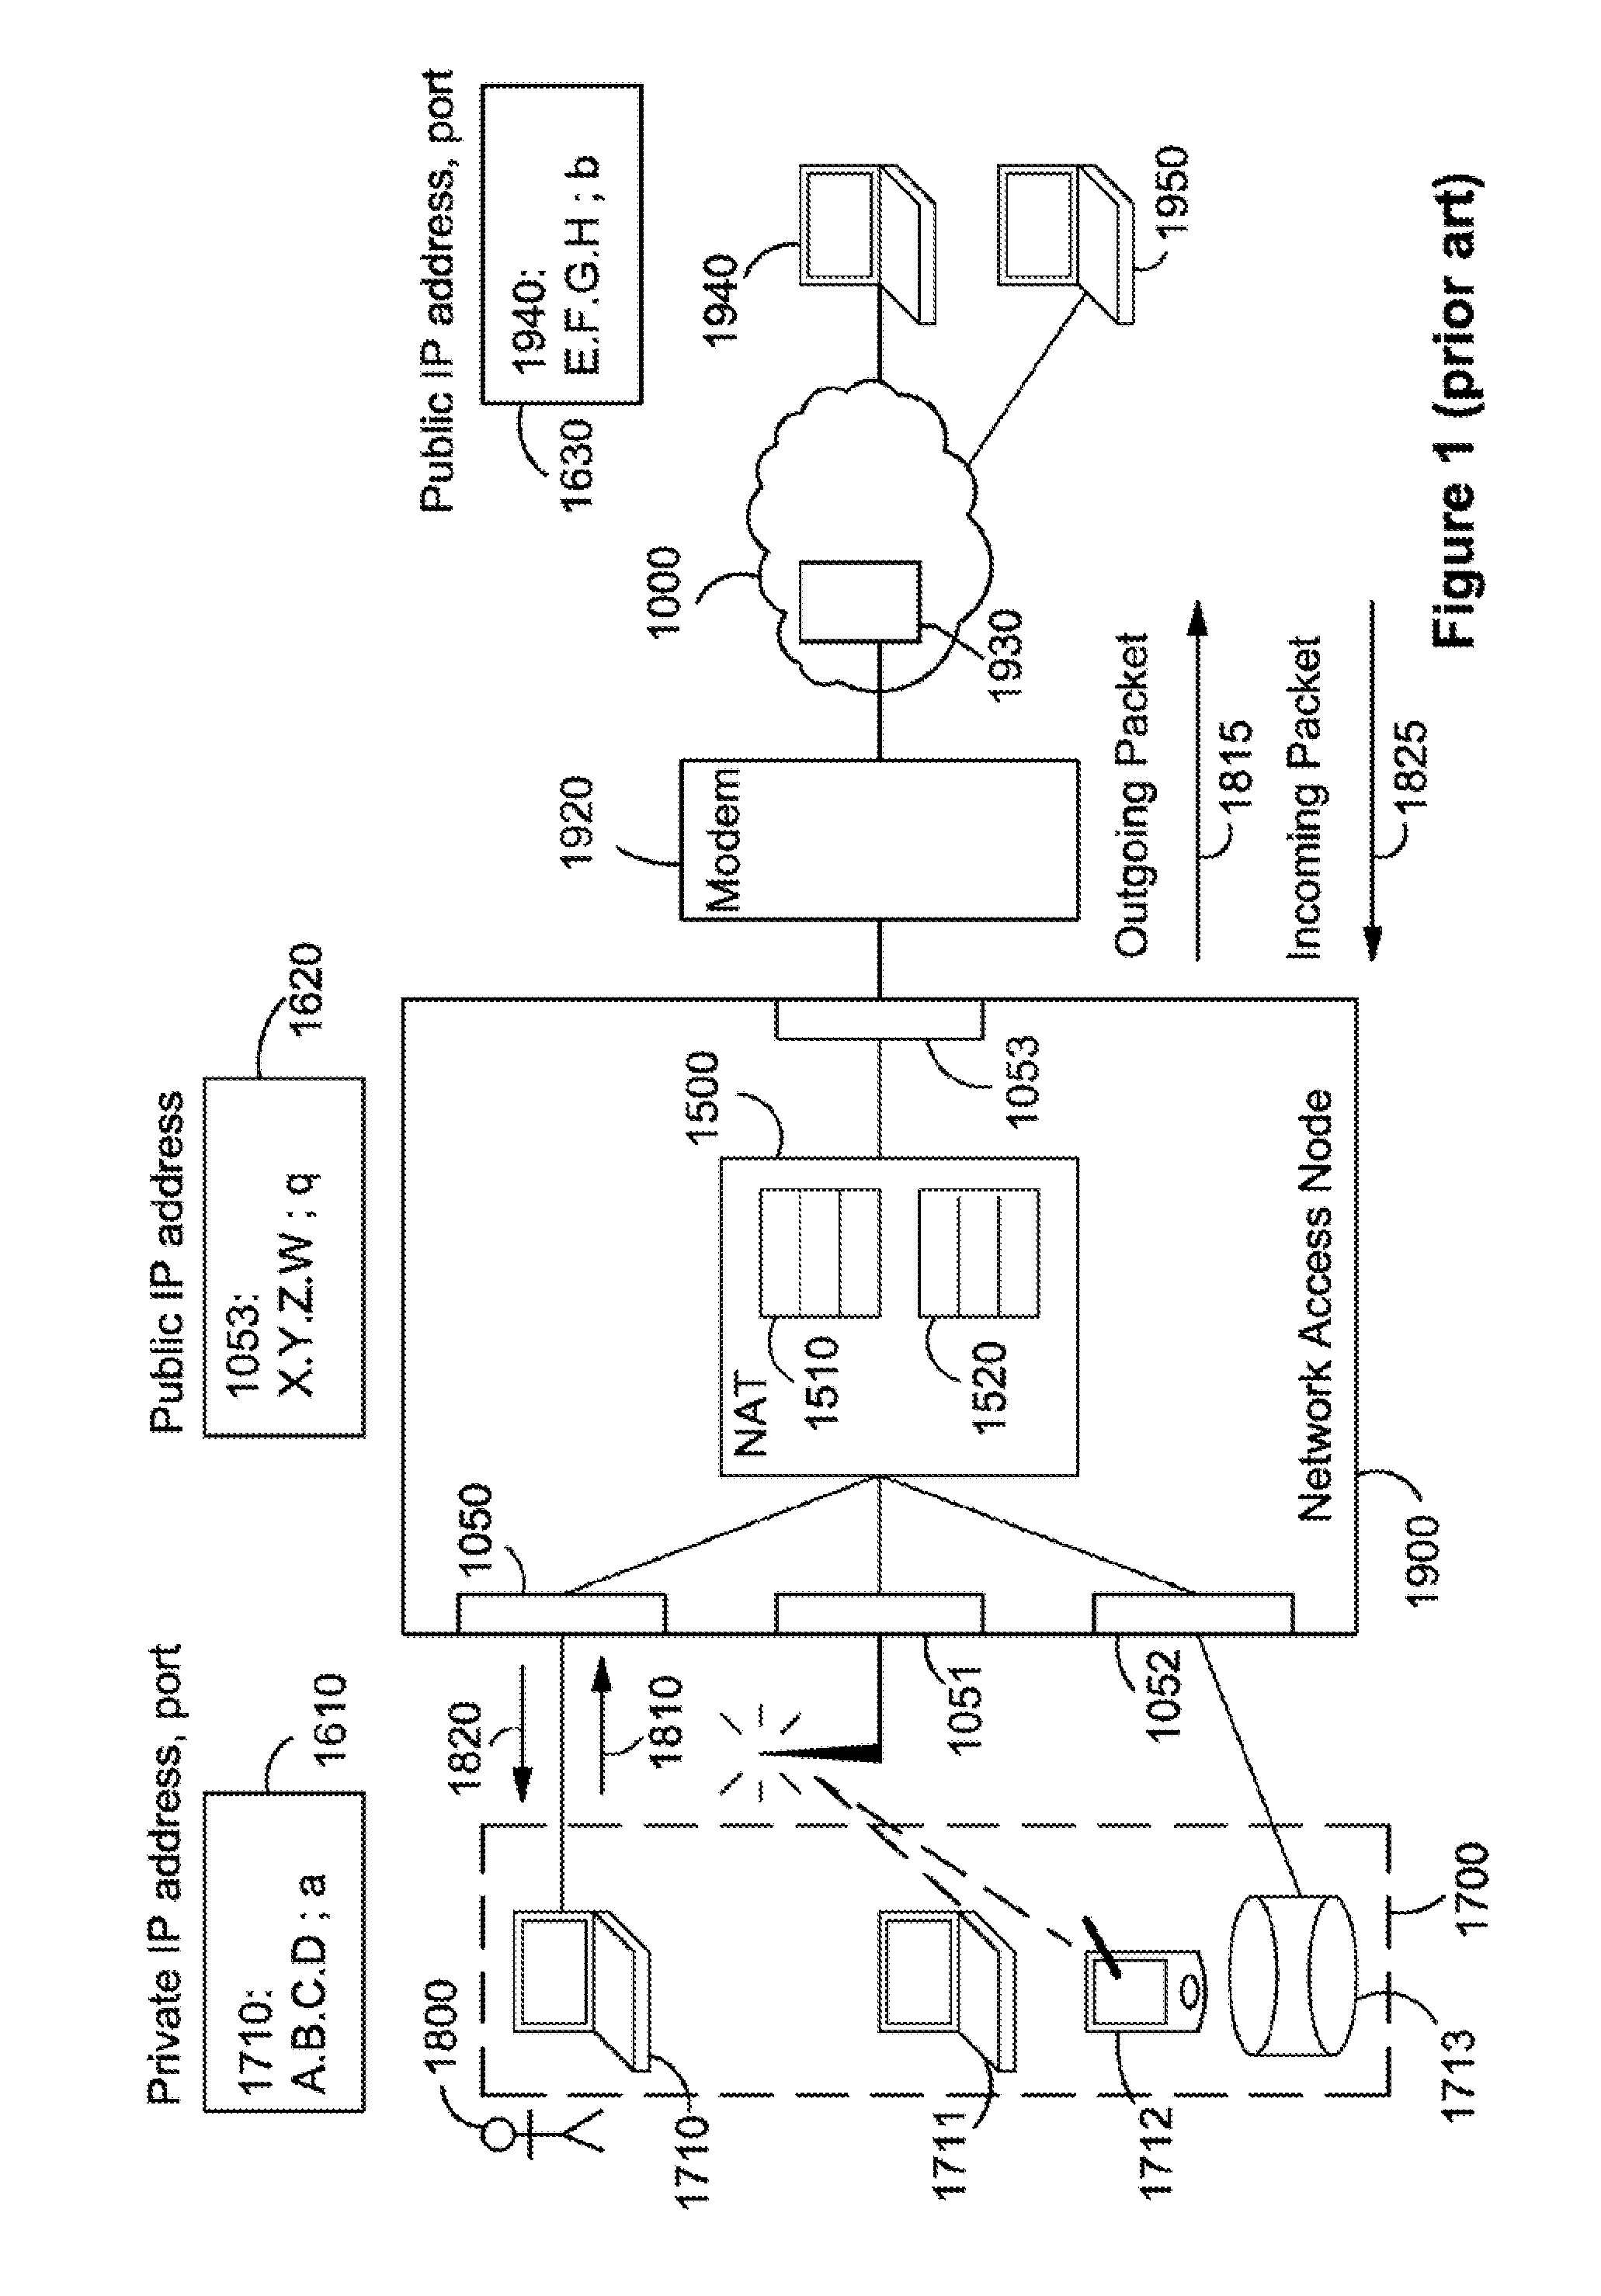 Method of facilitating IP connections to hosts behind middleboxes